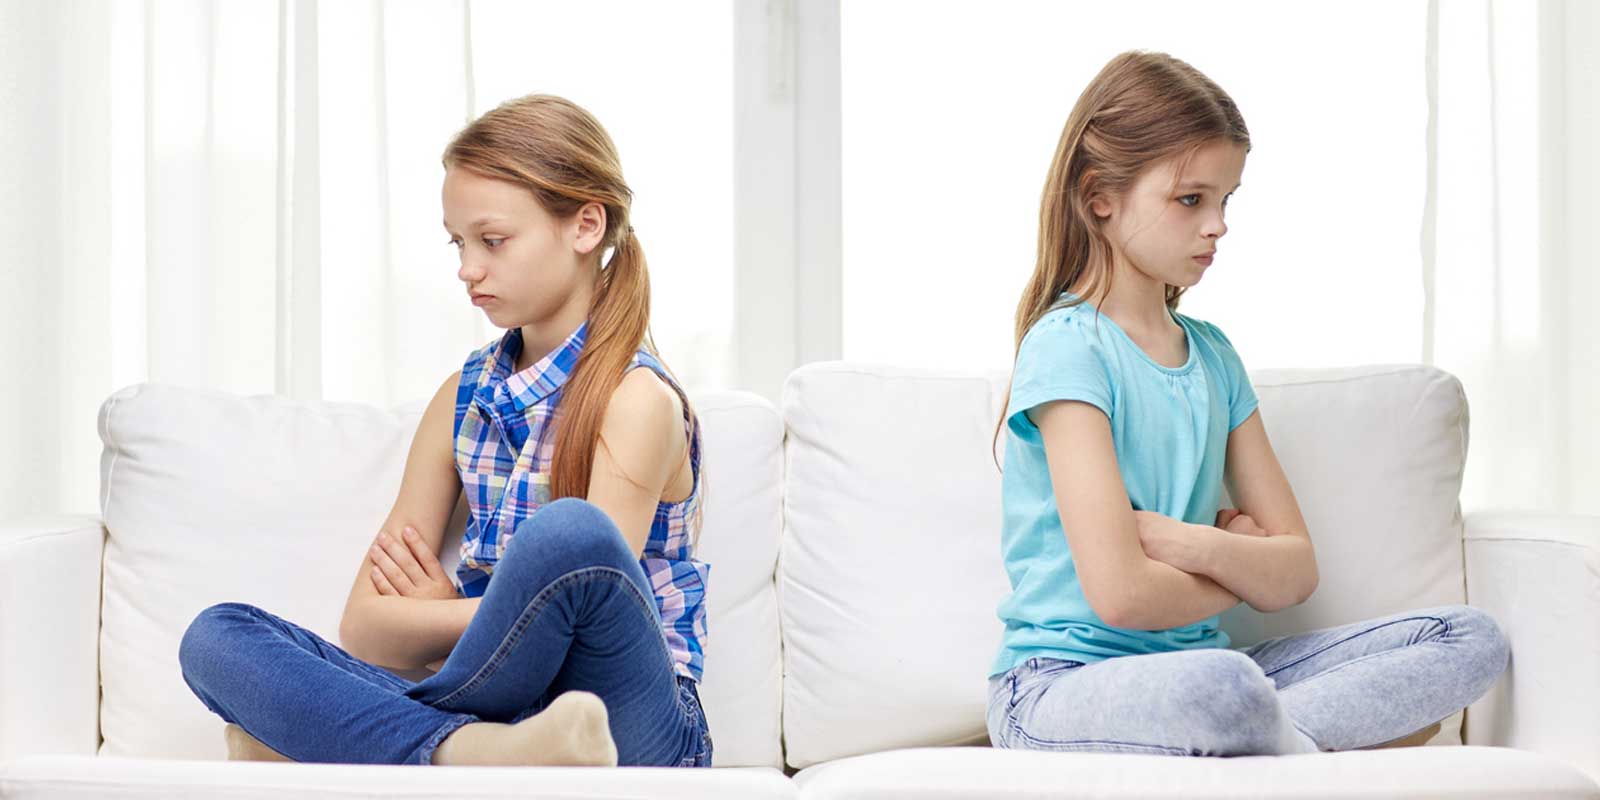 Two girls sitting back to back with their arms folded, looking cross